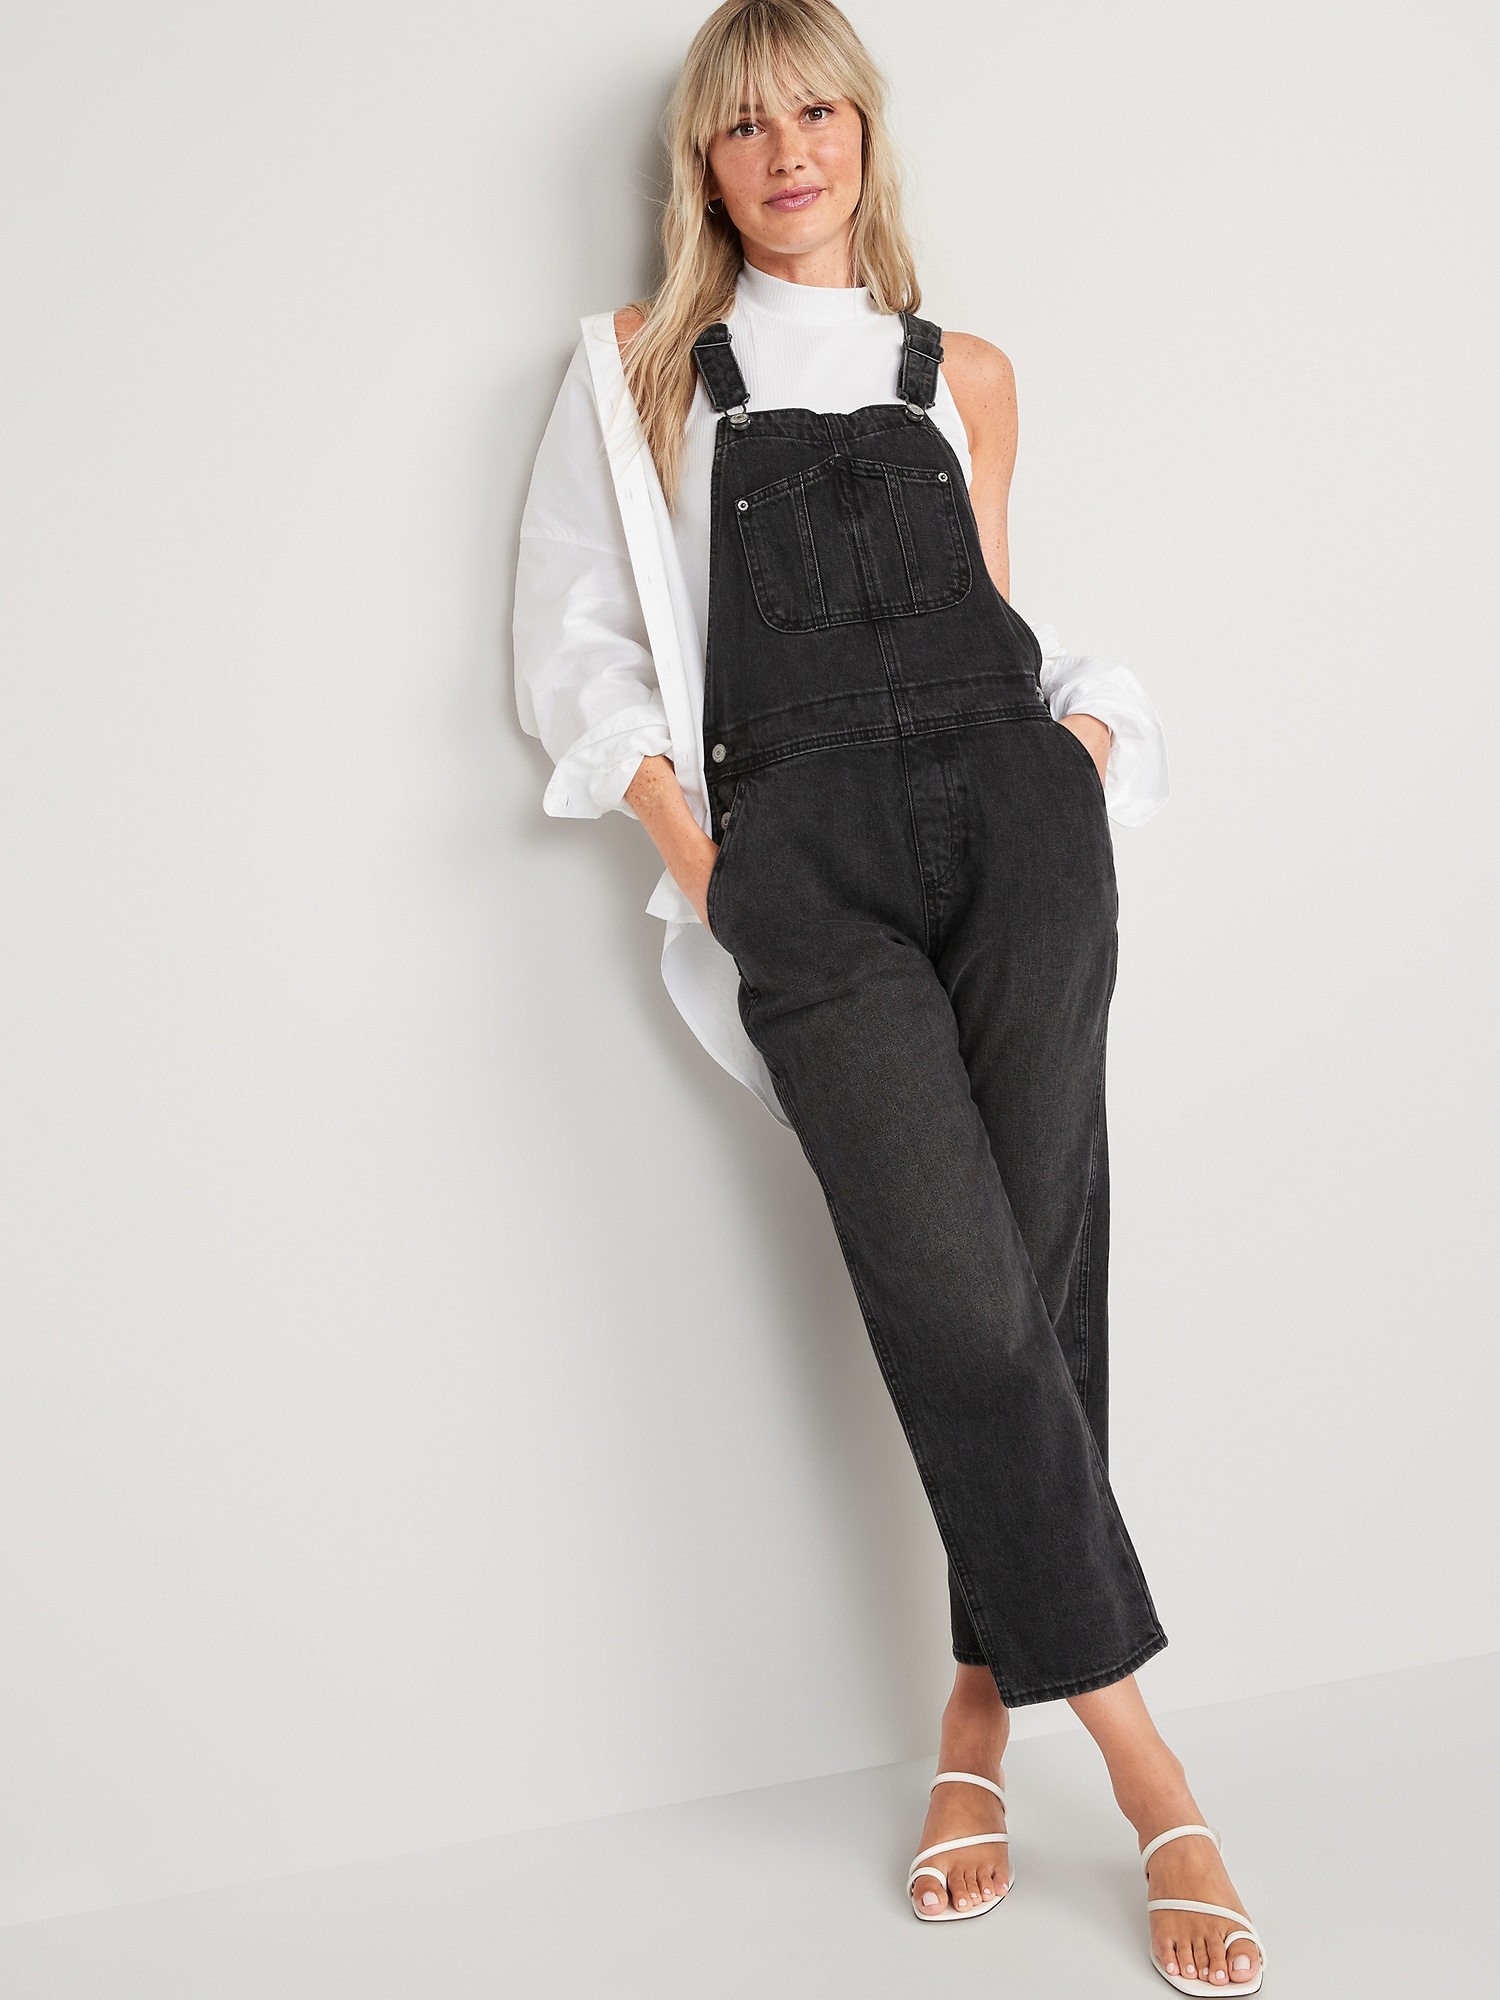 Distressed Jean Overalls for Women, Old Navy